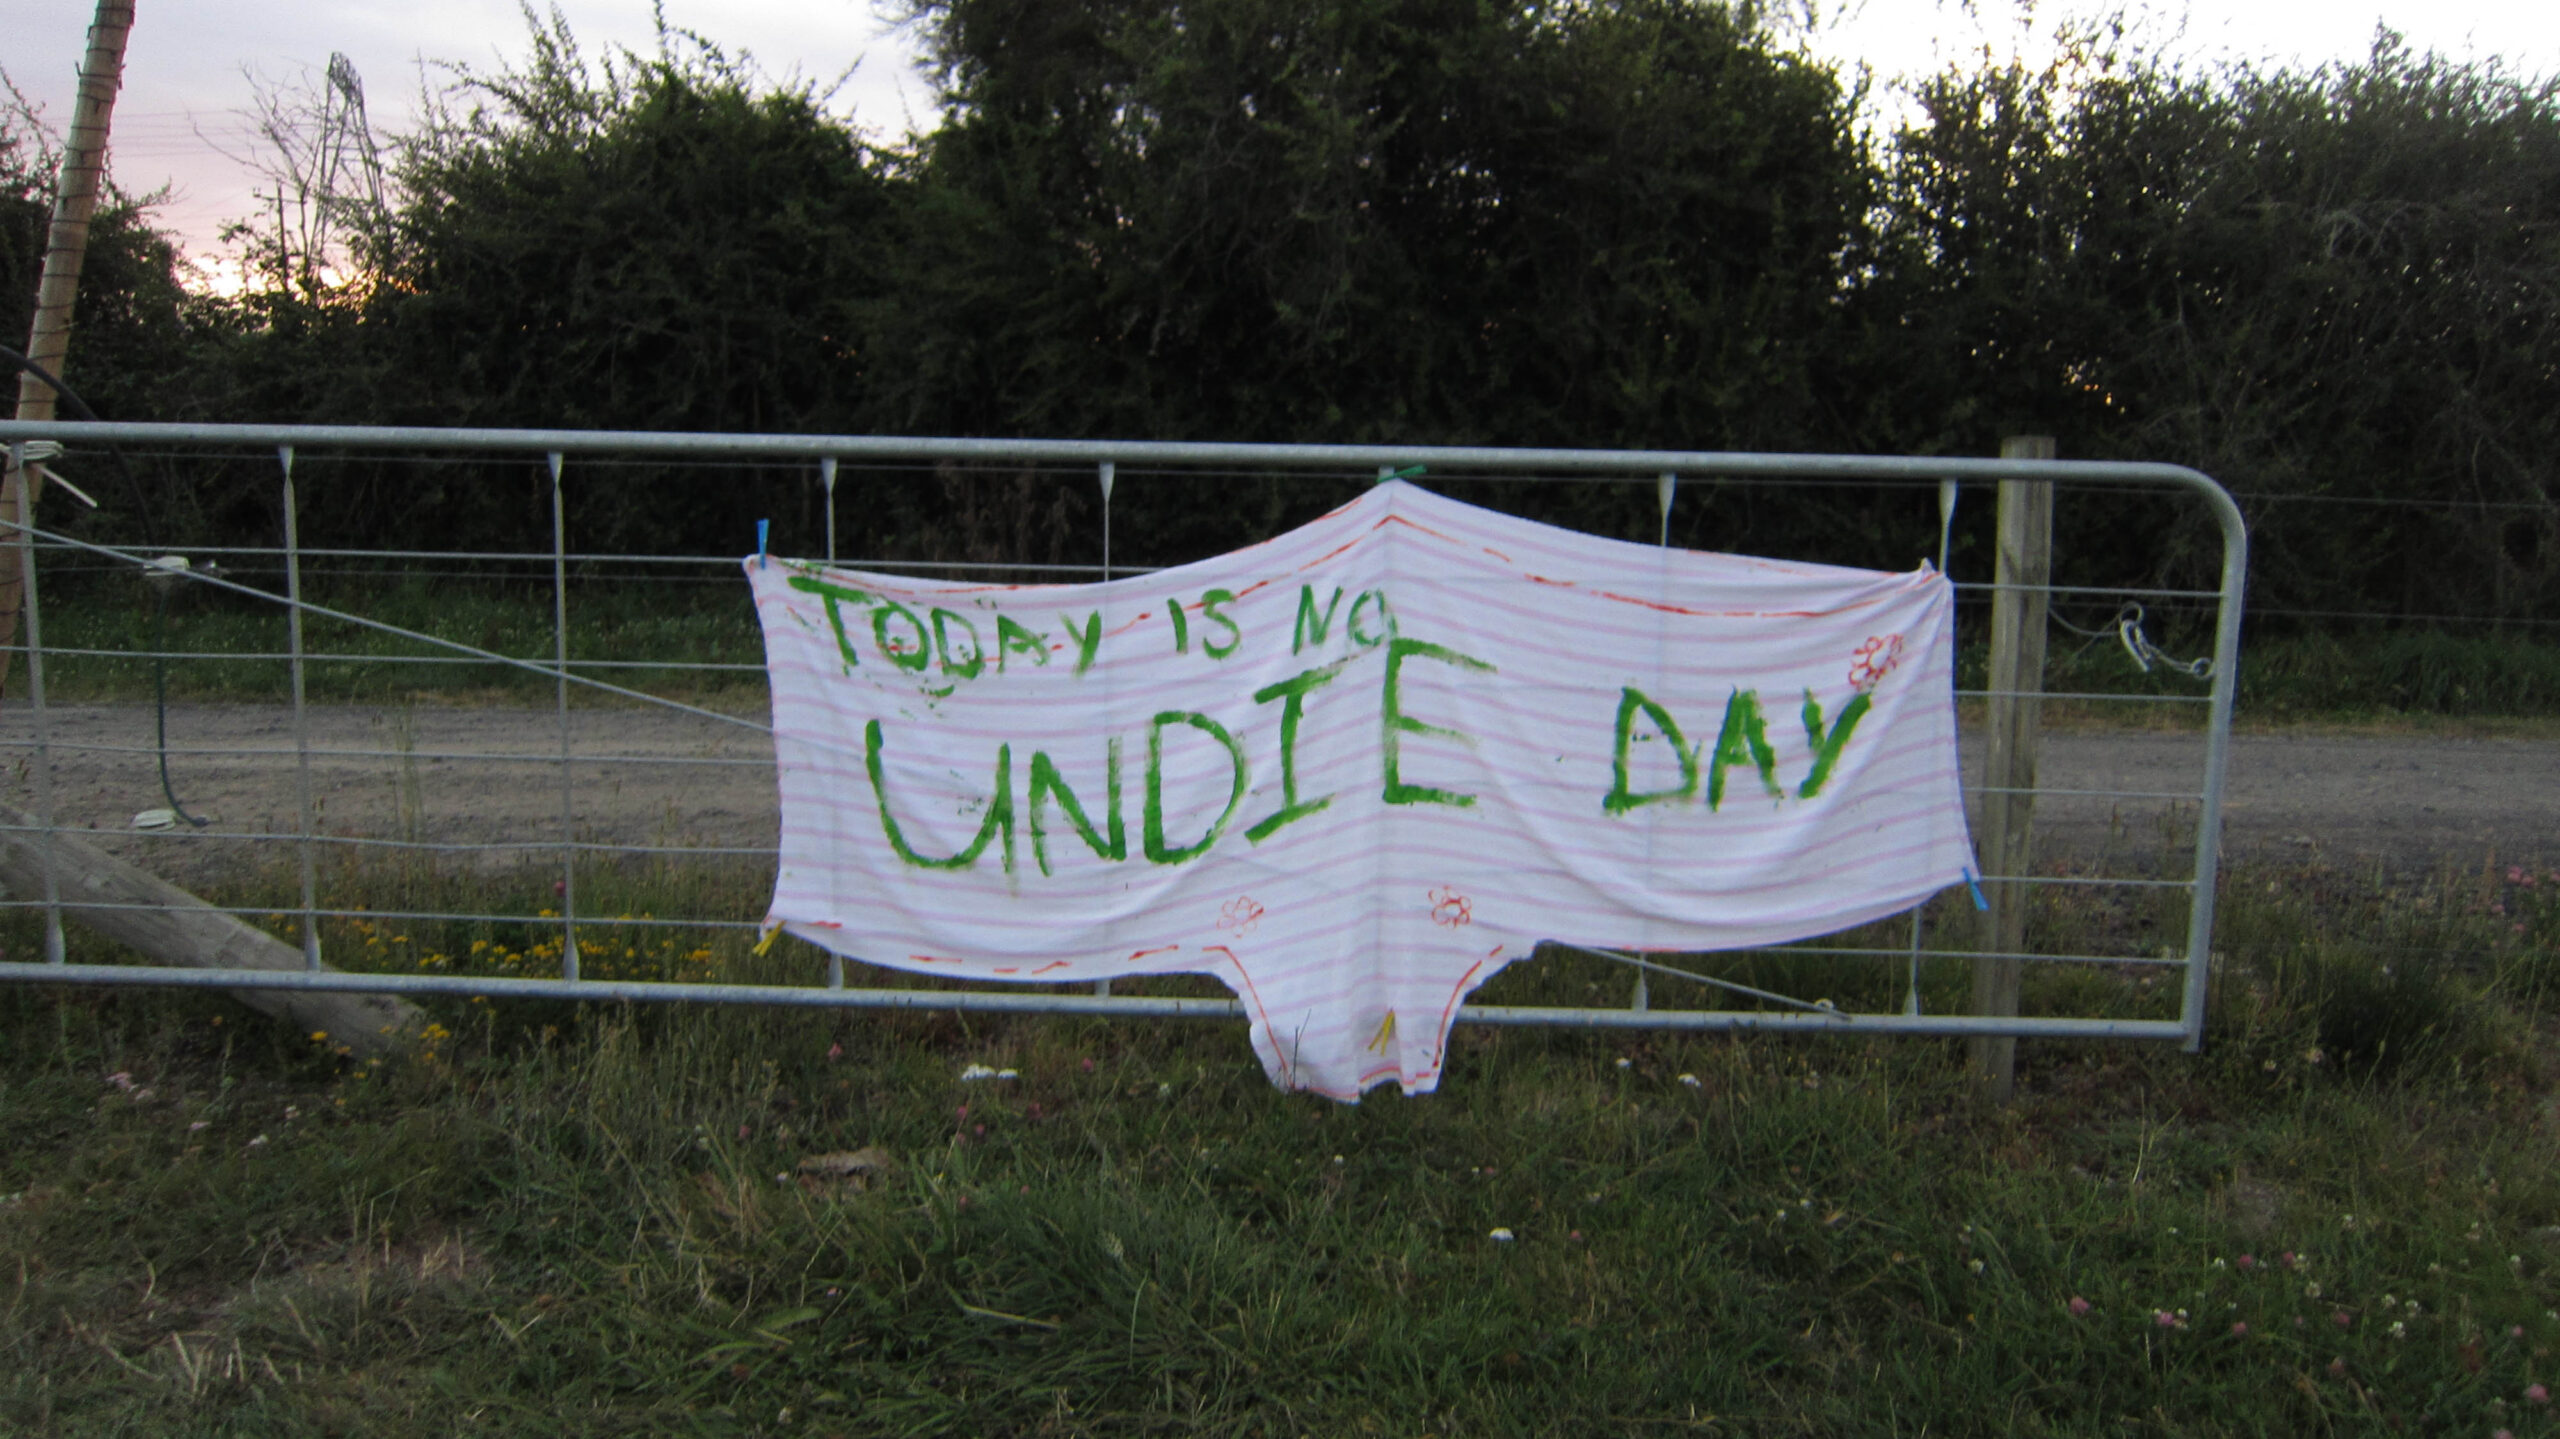 a large white cloth in the shape of underwear hangs on a steel gate with the words 'today is no undie day' written on it